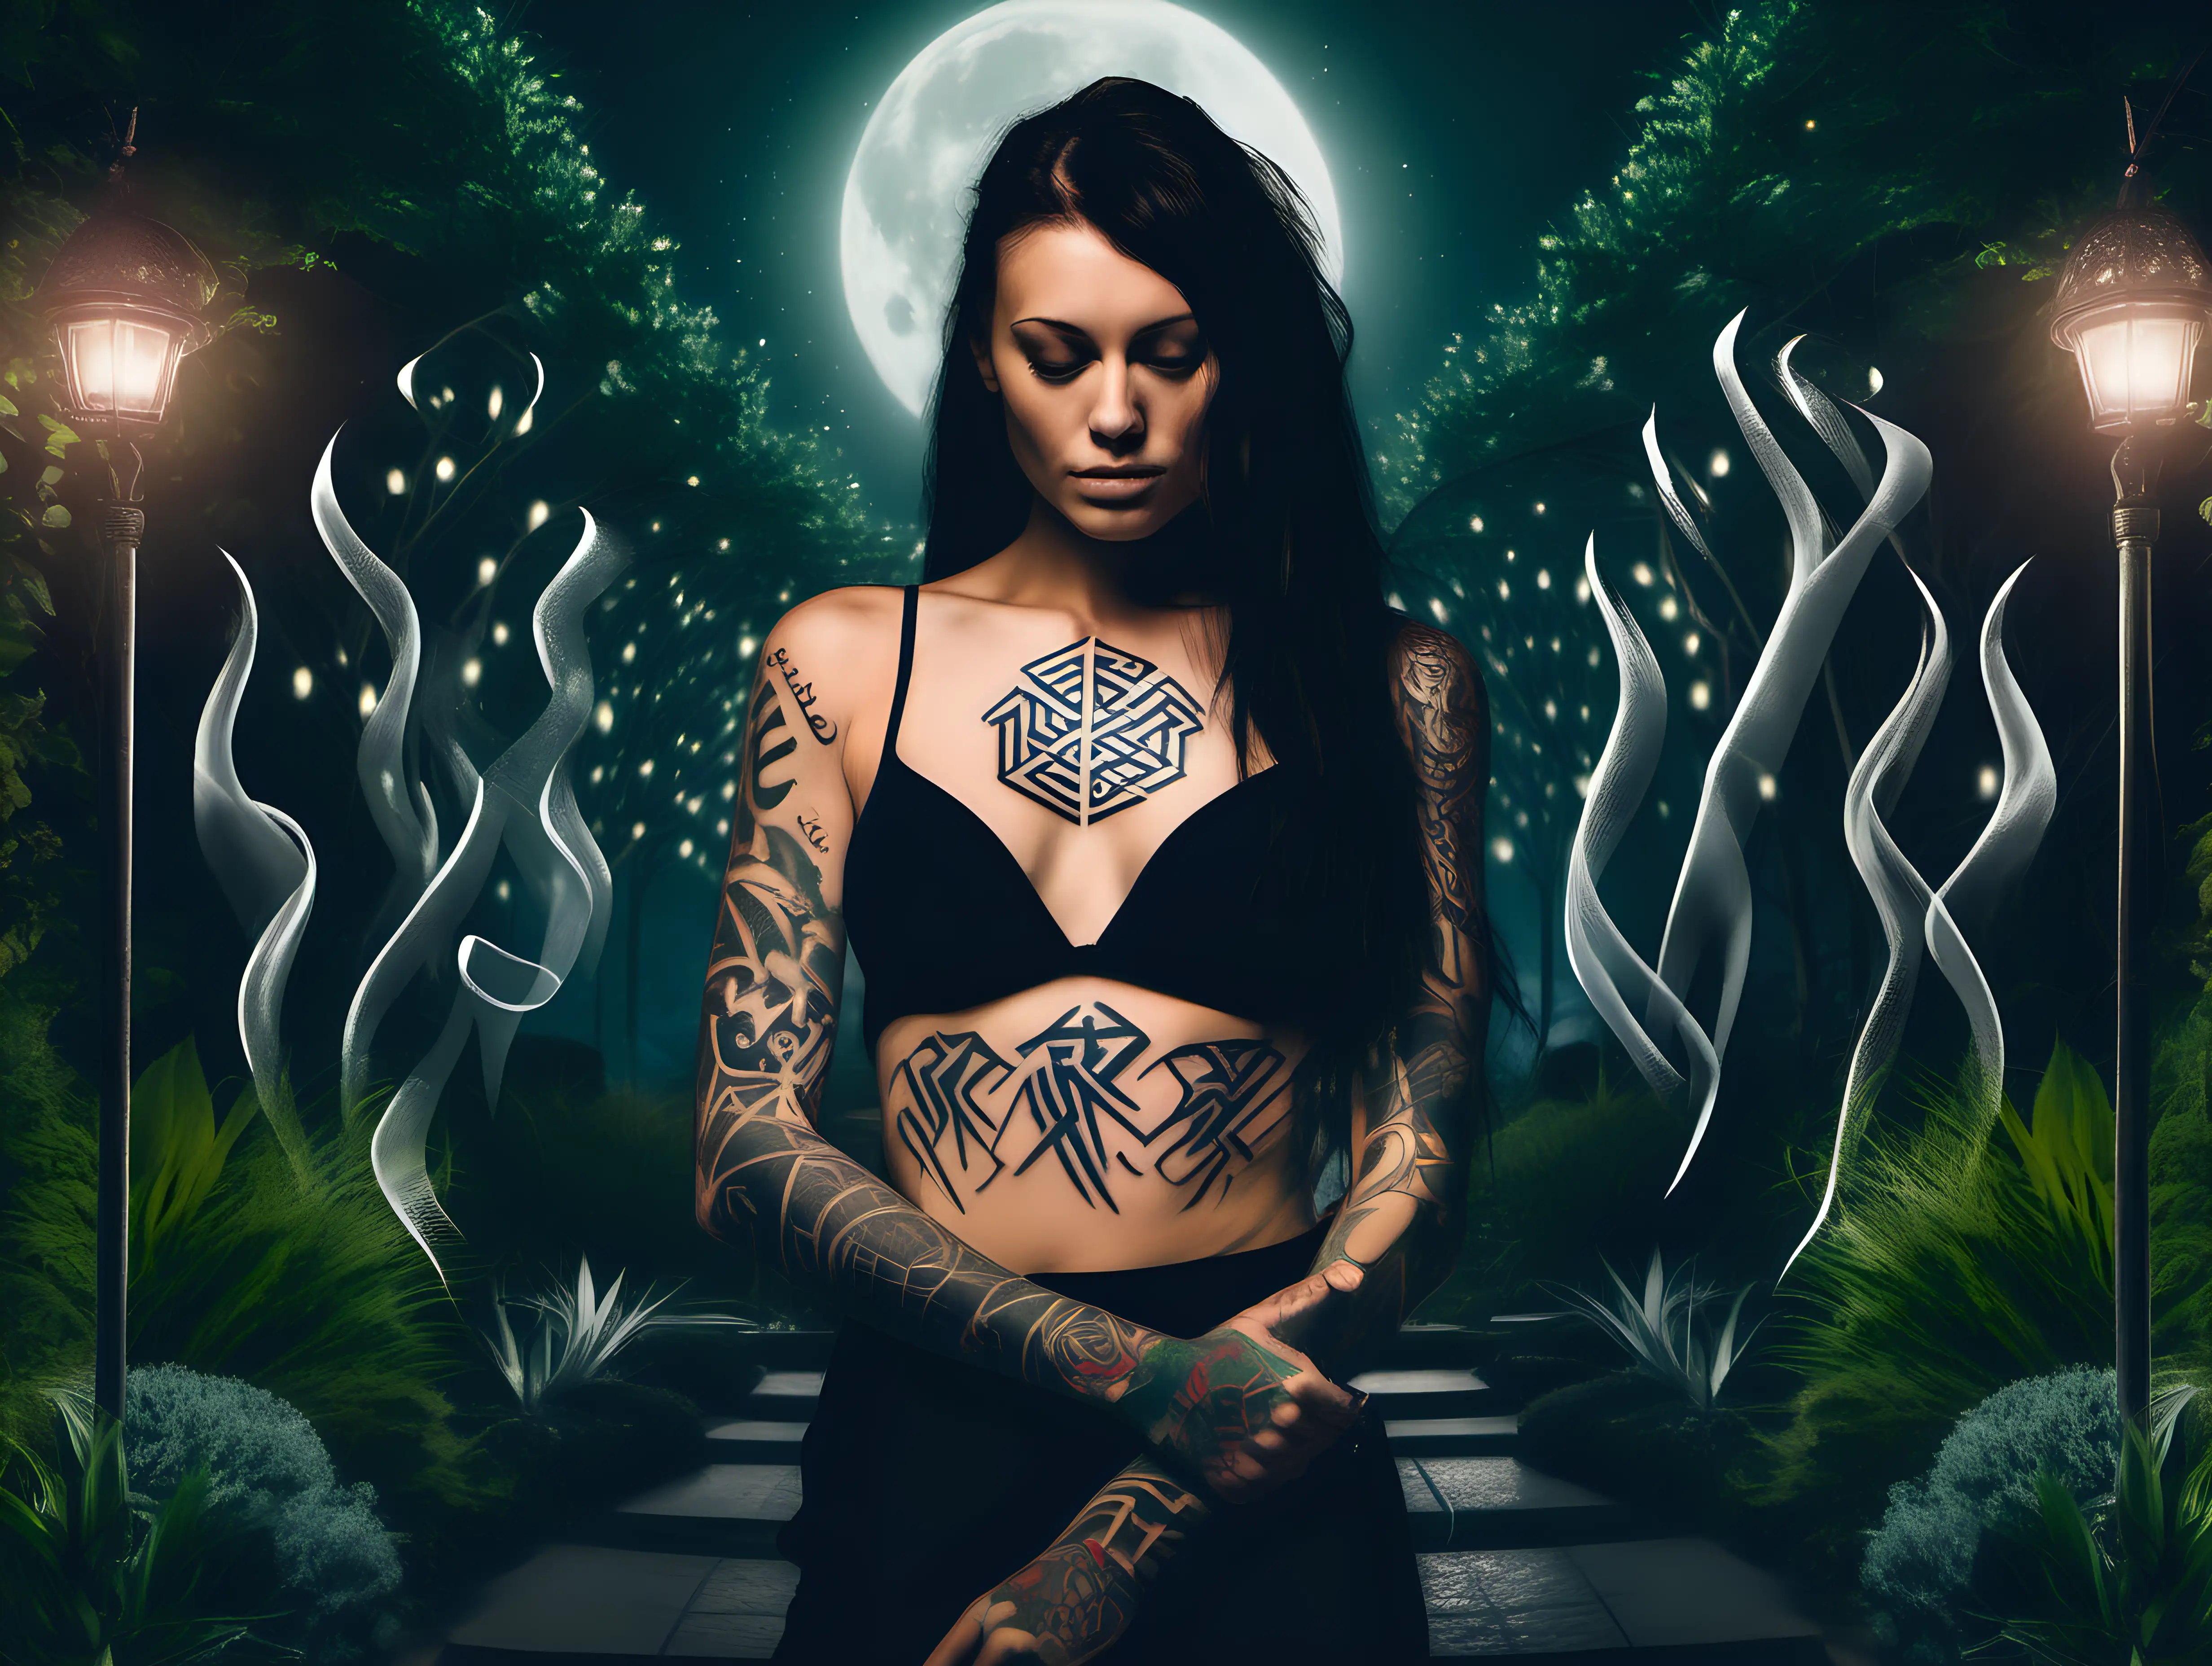 image of a female human with draconic runes tattooed on arms and body, in a beautiful garden lit up by the moonlight